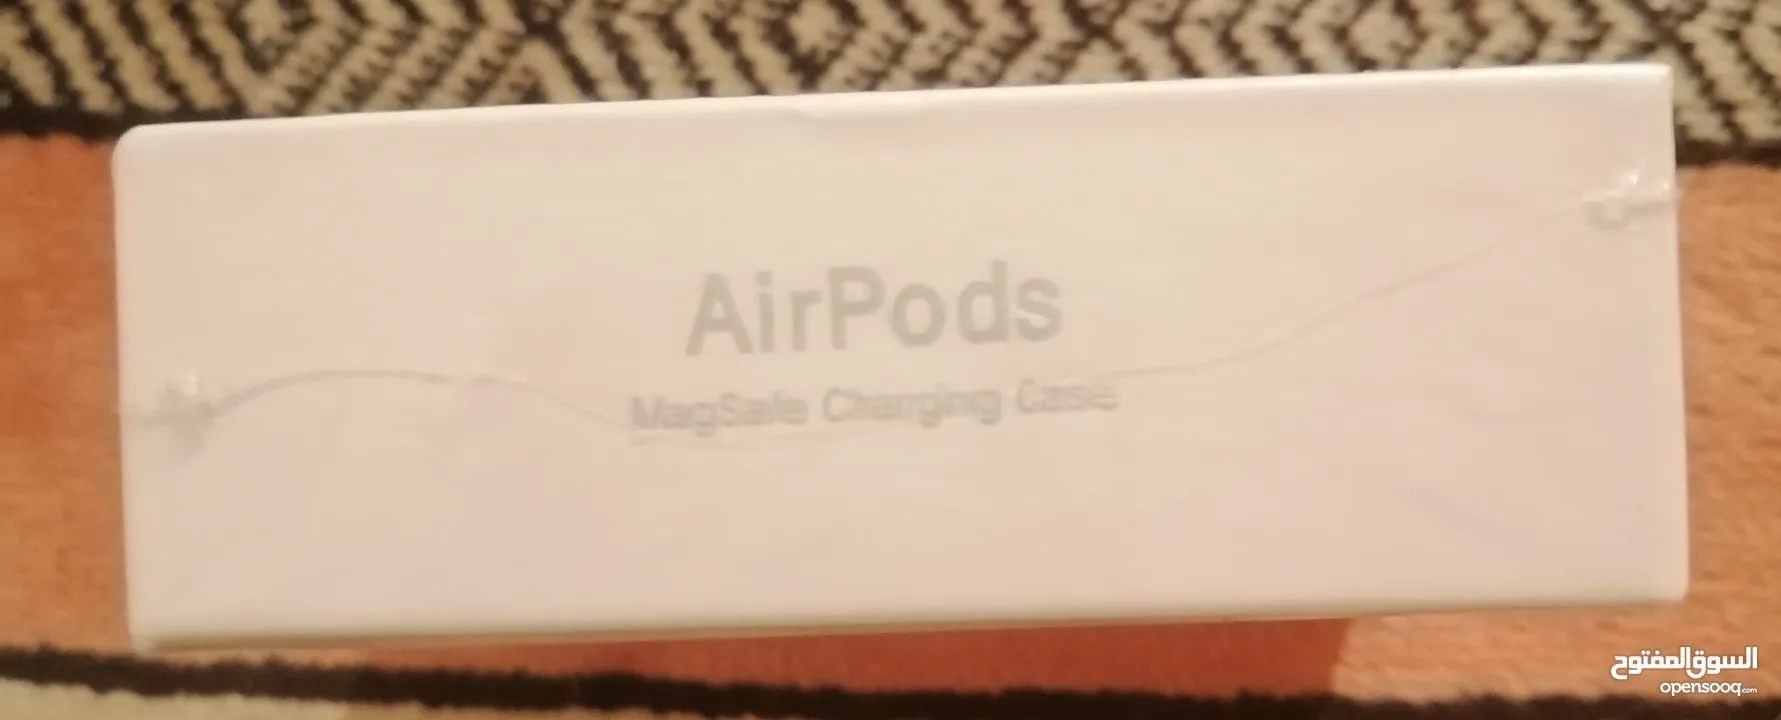 Airpds Apple